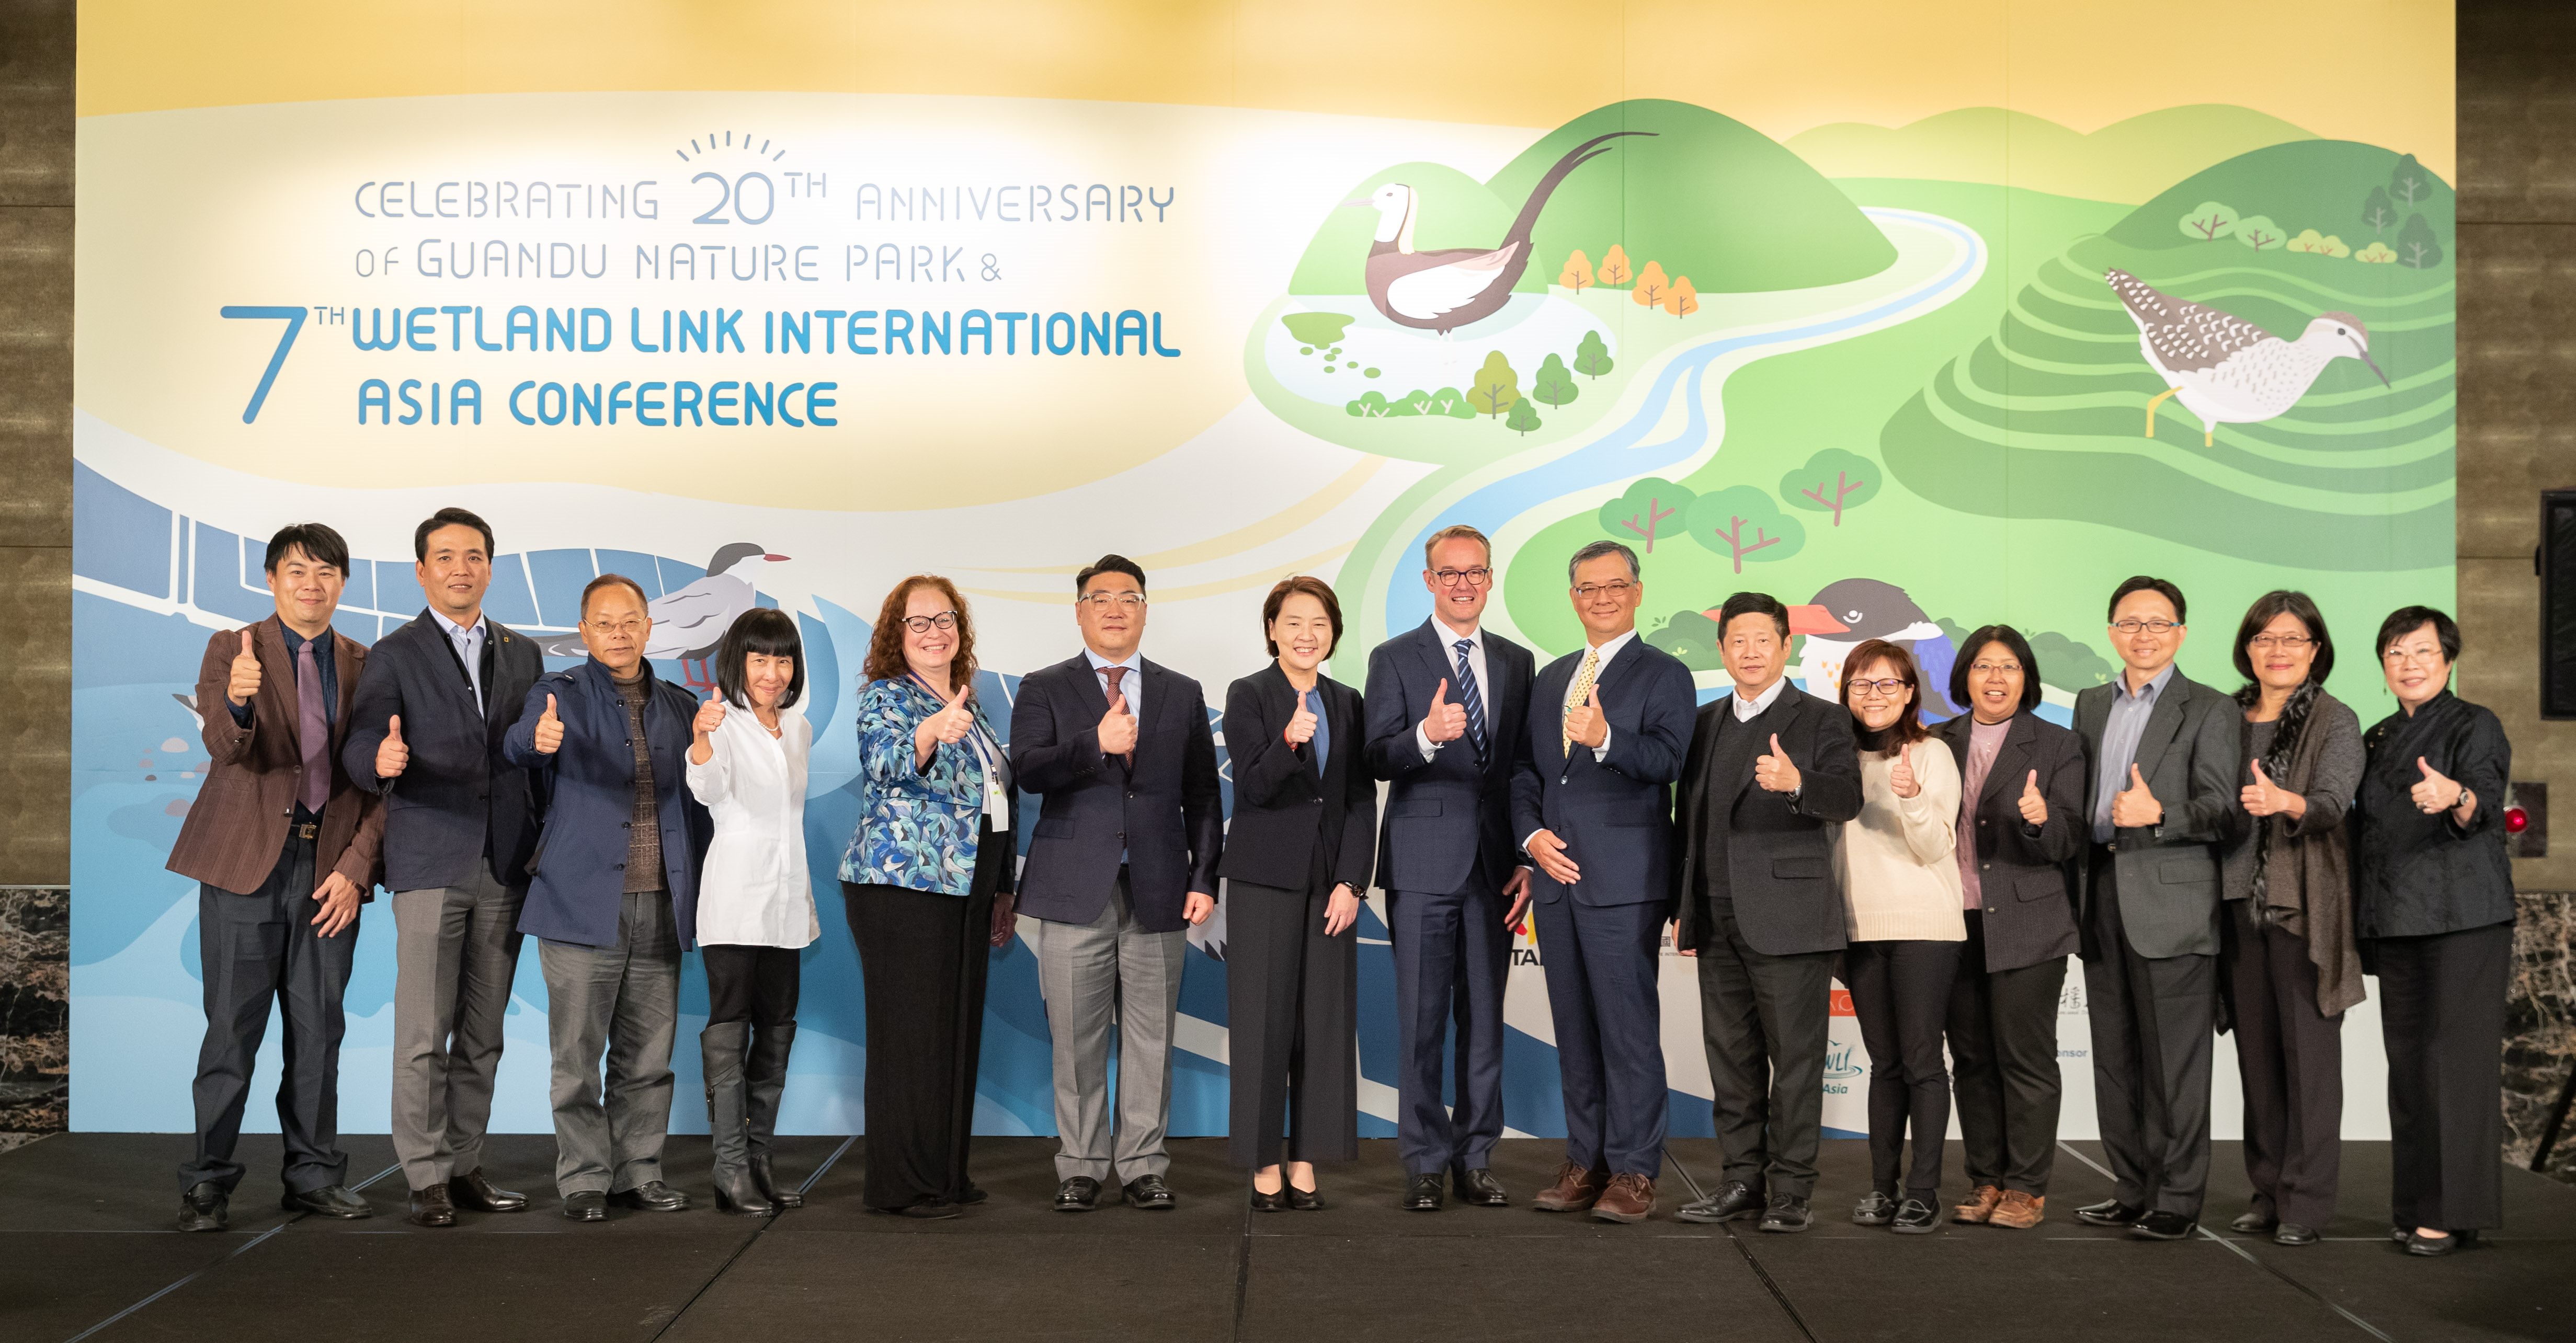 Deputy Mayor Huang and visitant partners  the 7th Wetland Link International Asia Conference of Group Photo